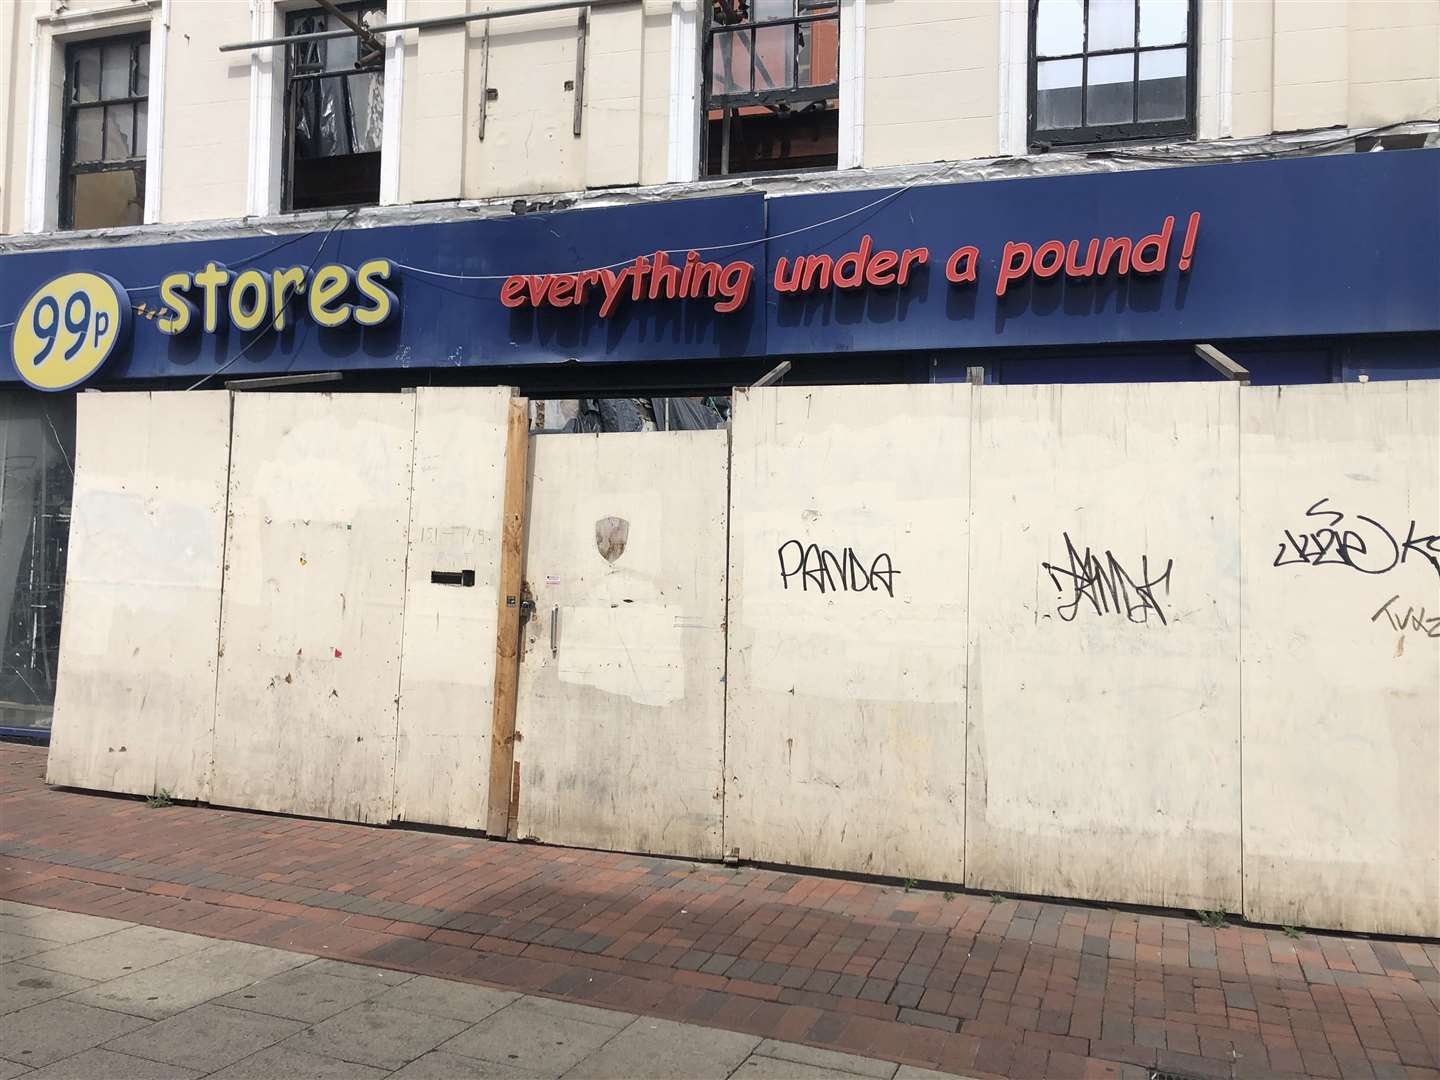 A boarded-up 99p Stores in Chatham High Street